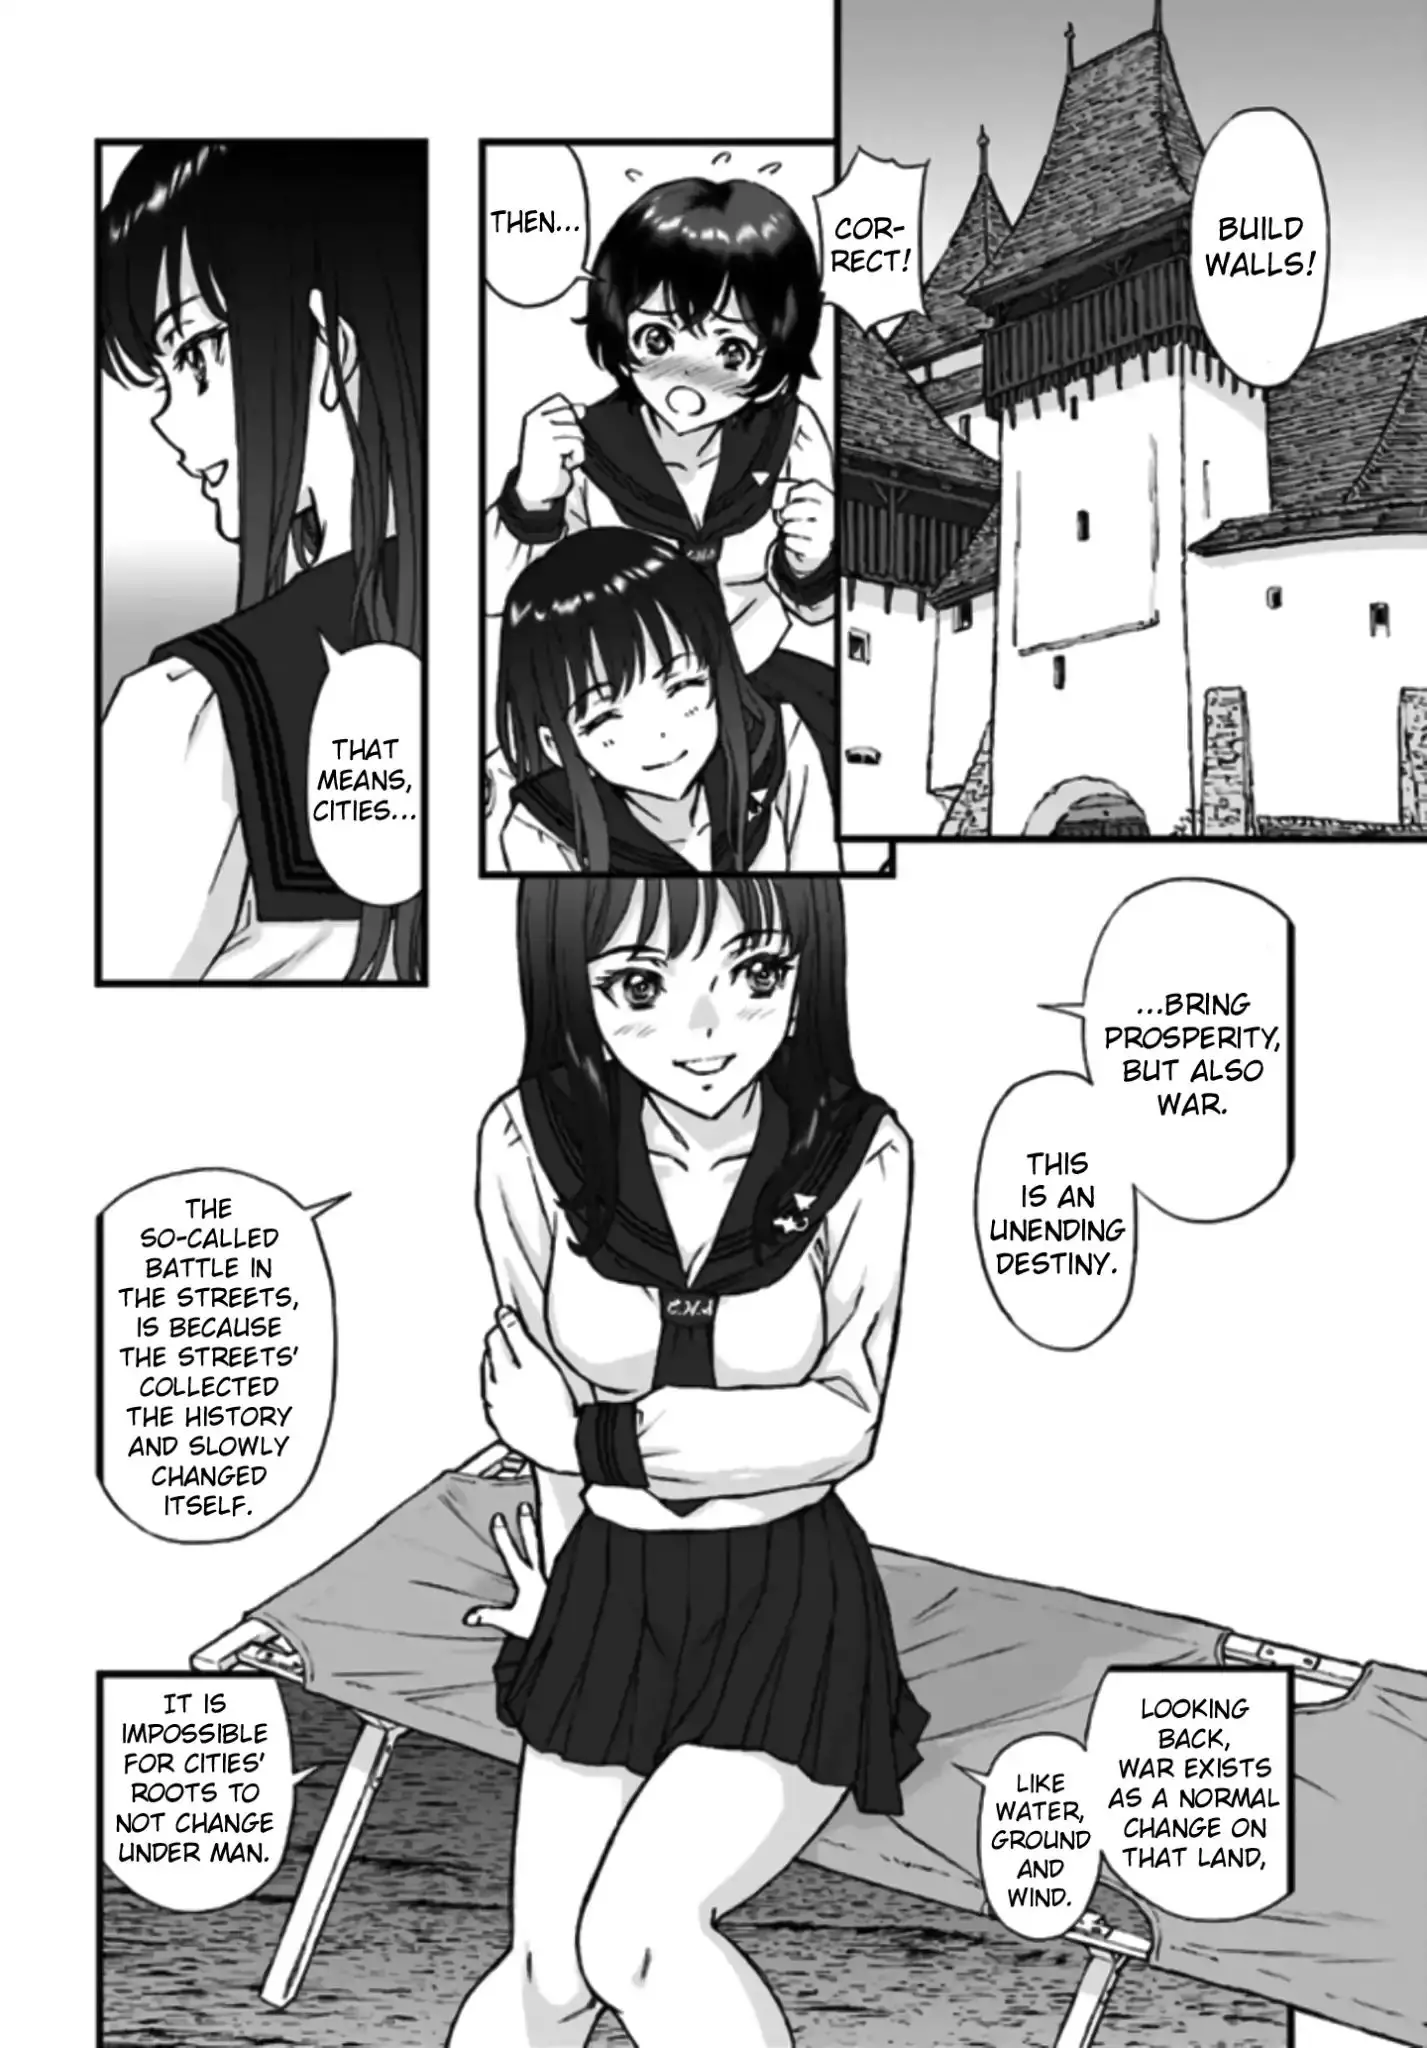 Girls Und Panzer - The Fir Tree And The Iron-Winged Witch - 1 page 3